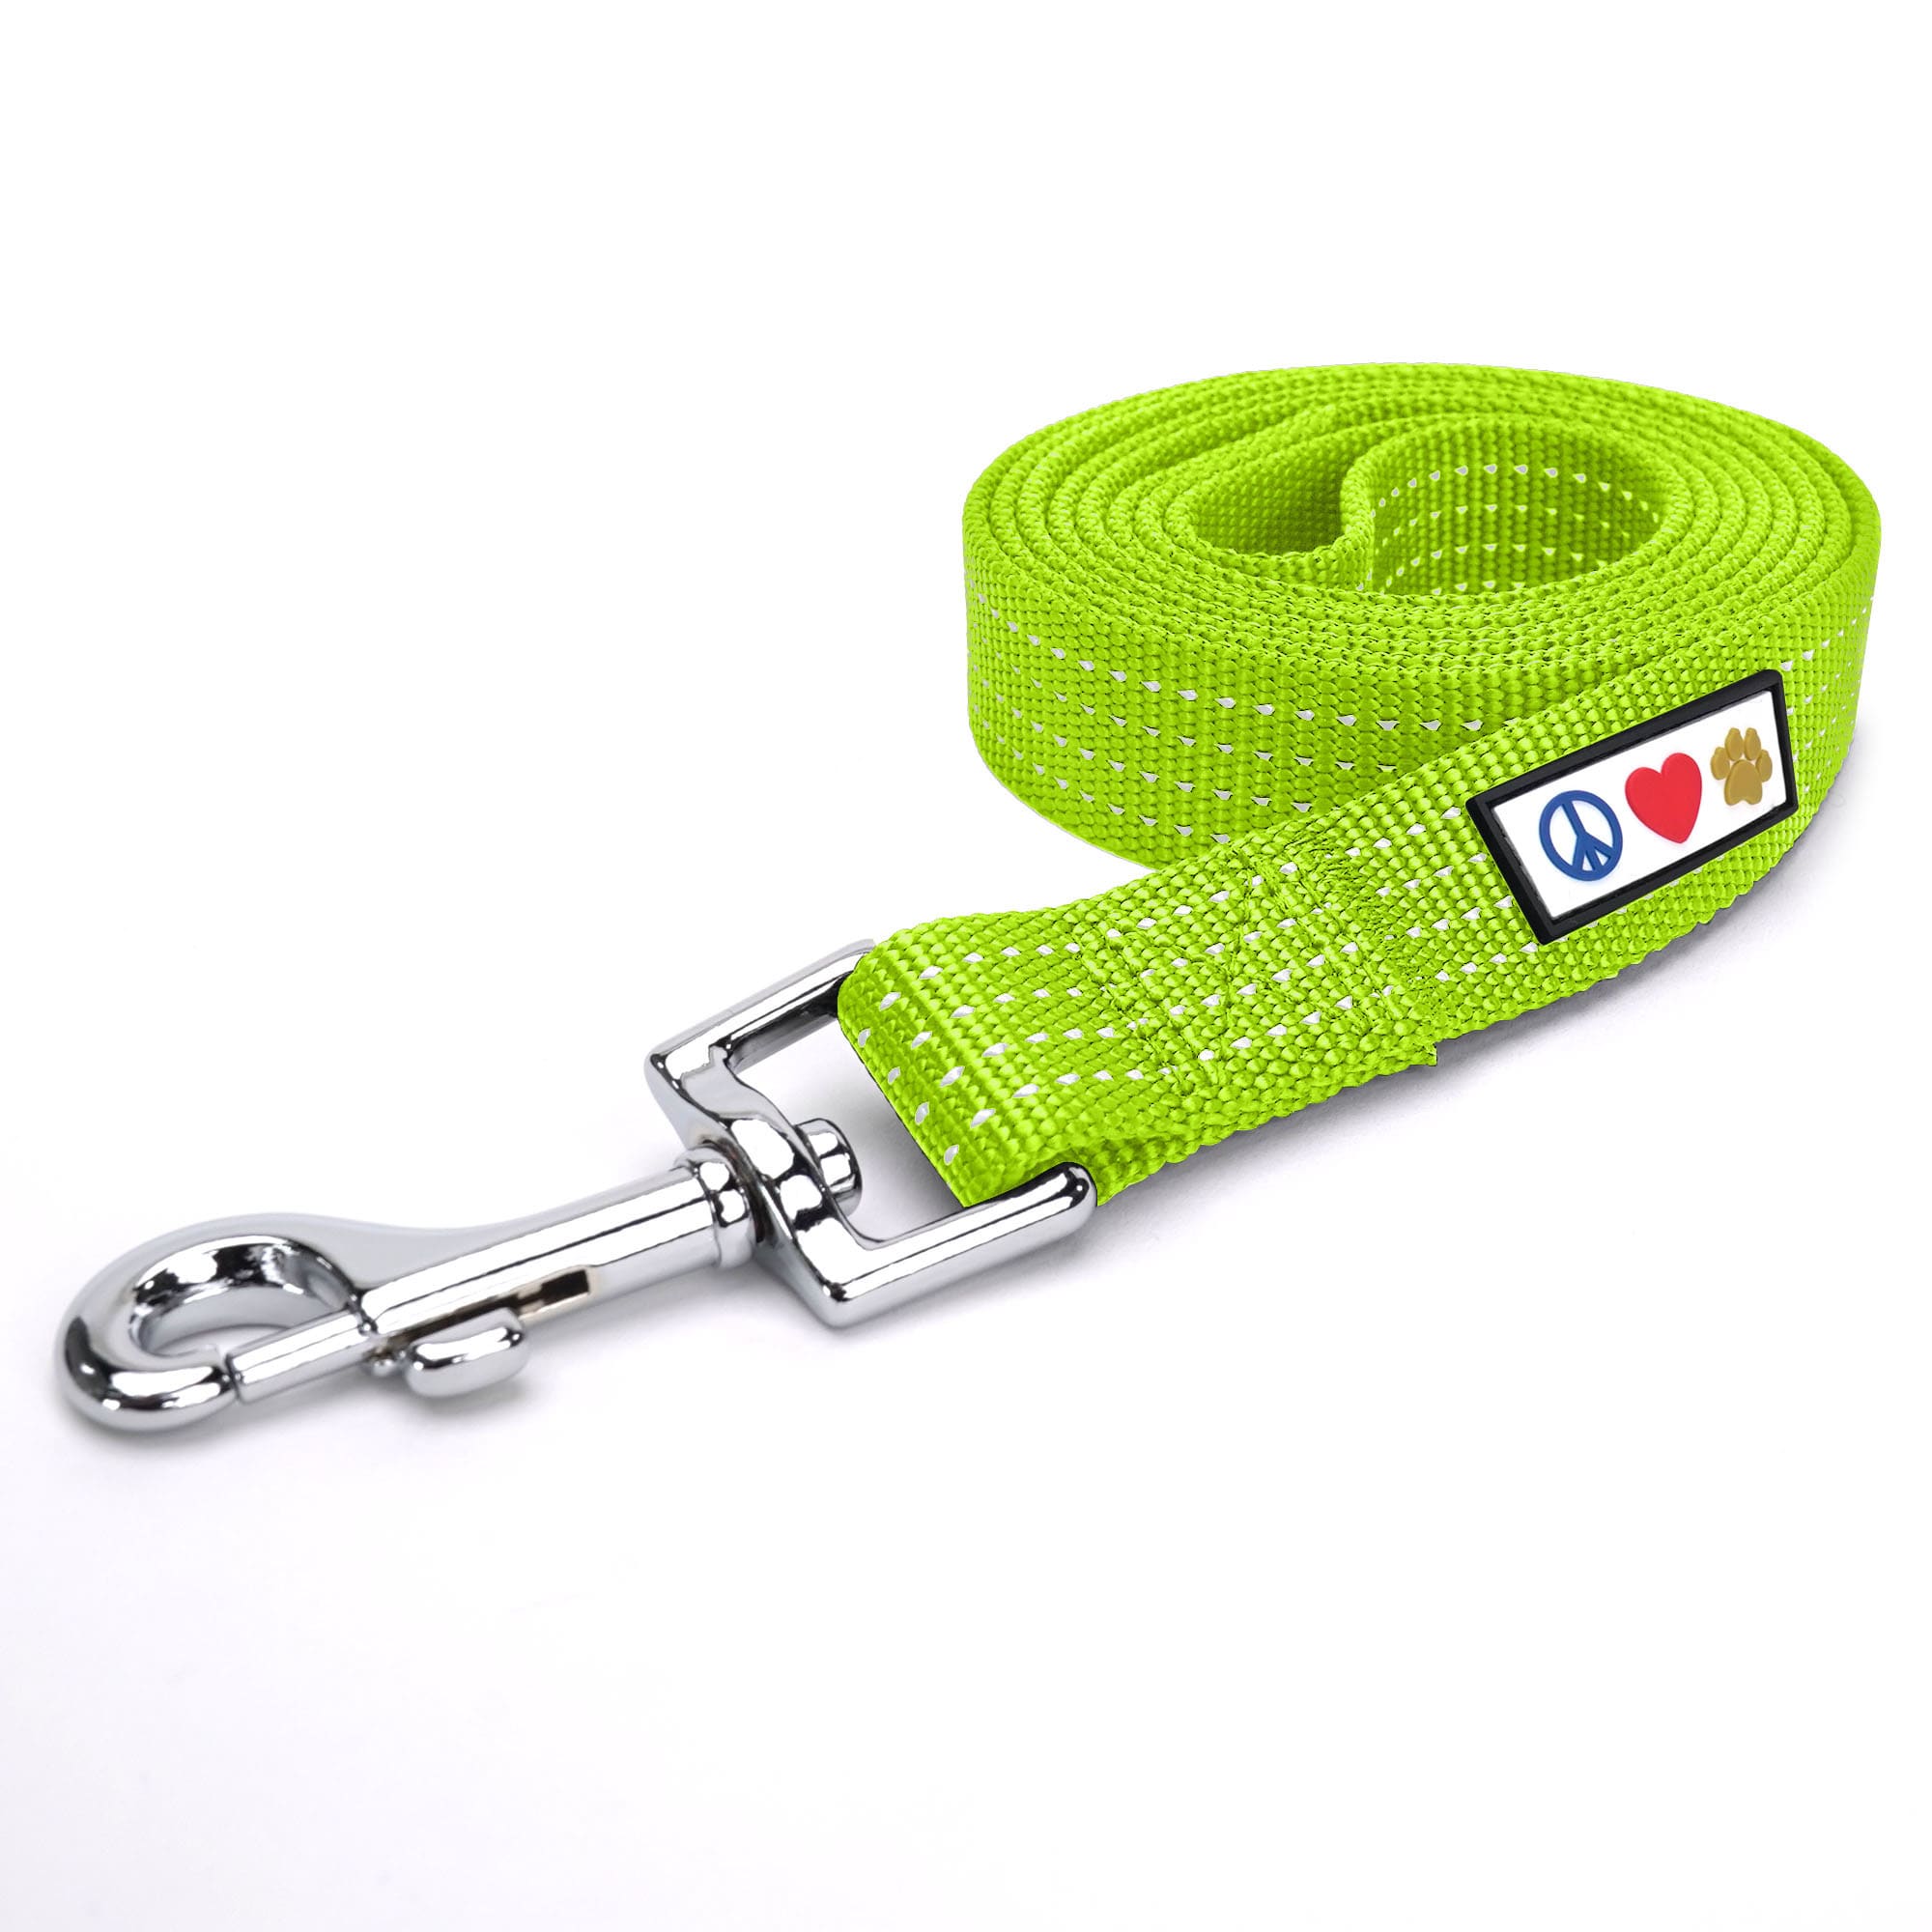 Pawtitas 6 feet Green Reflective Puppy or Dog Leash, X-Small/Small | Petco